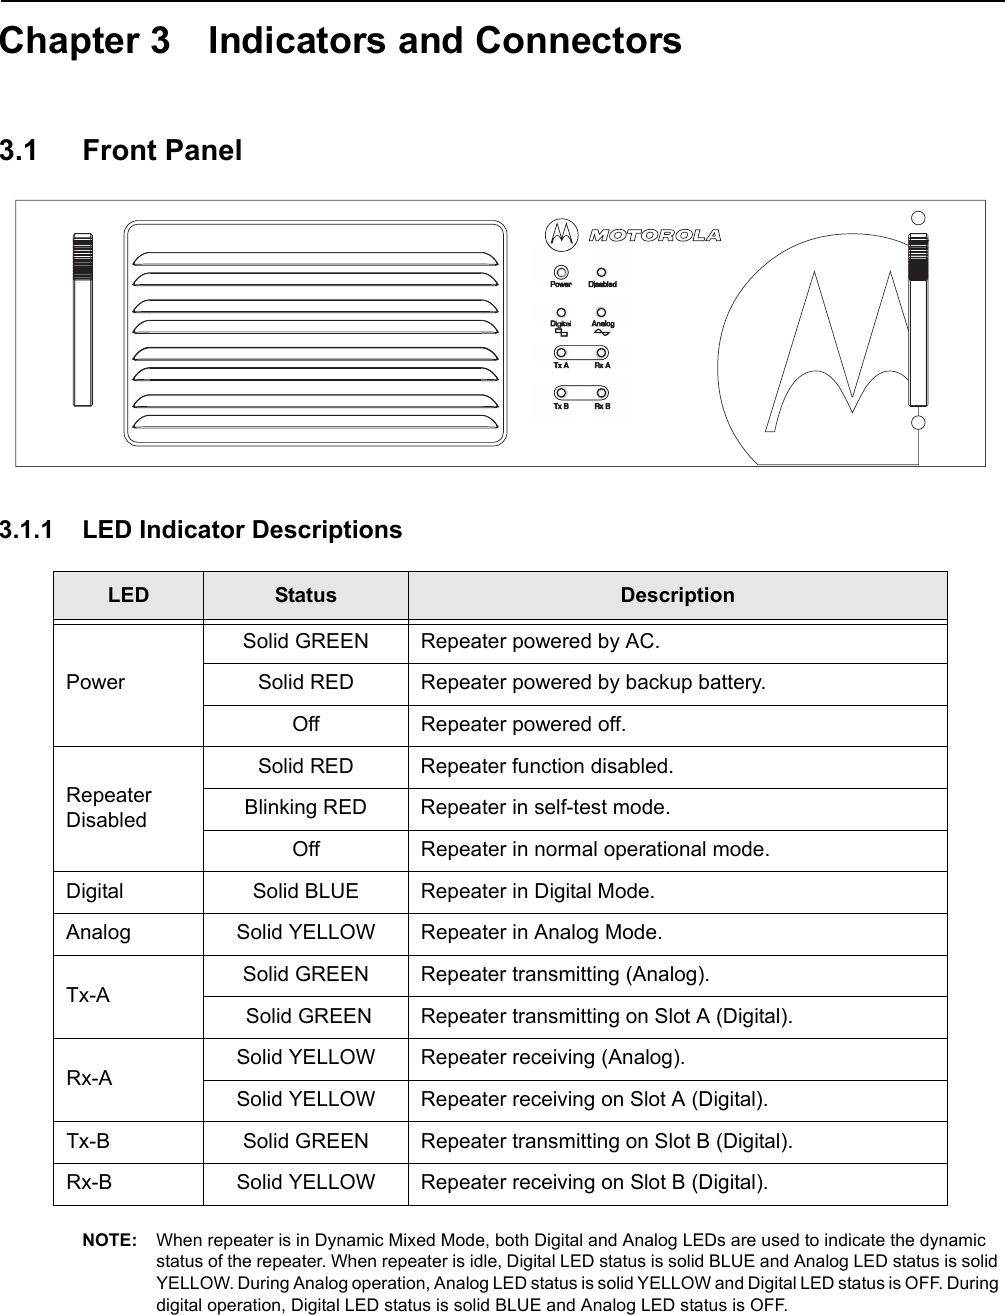 Chapter 3 Indicators and Connectors3.1 Front Panel 3.1.1 LED Indicator DescriptionsNOTE: When repeater is in Dynamic Mixed Mode, both Digital and Analog LEDs are used to indicate the dynamic status of the repeater. When repeater is idle, Digital LED status is solid BLUE and Analog LED status is solid YELLOW. During Analog operation, Analog LED status is solid YELLOW and Digital LED status is OFF. During digital operation, Digital LED status is solid BLUE and Analog LED status is OFF. LED Status DescriptionPowerSolid GREEN Repeater powered by AC.Solid RED Repeater powered by backup battery.Off Repeater powered off.Repeater DisabledSolid RED Repeater function disabled.Blinking RED Repeater in self-test mode.Off Repeater in normal operational mode.Digital  Solid BLUE Repeater in Digital Mode.Analog Solid YELLOW Repeater in Analog Mode.Tx-ASolid GREEN Repeater transmitting (Analog). Solid GREEN Repeater transmitting on Slot A (Digital).Rx-ASolid YELLOW Repeater receiving (Analog). Solid YELLOW Repeater receiving on Slot A (Digital).Tx-B Solid GREEN  Repeater transmitting on Slot B (Digital).Rx-B Solid YELLOW Repeater receiving on Slot B (Digital).